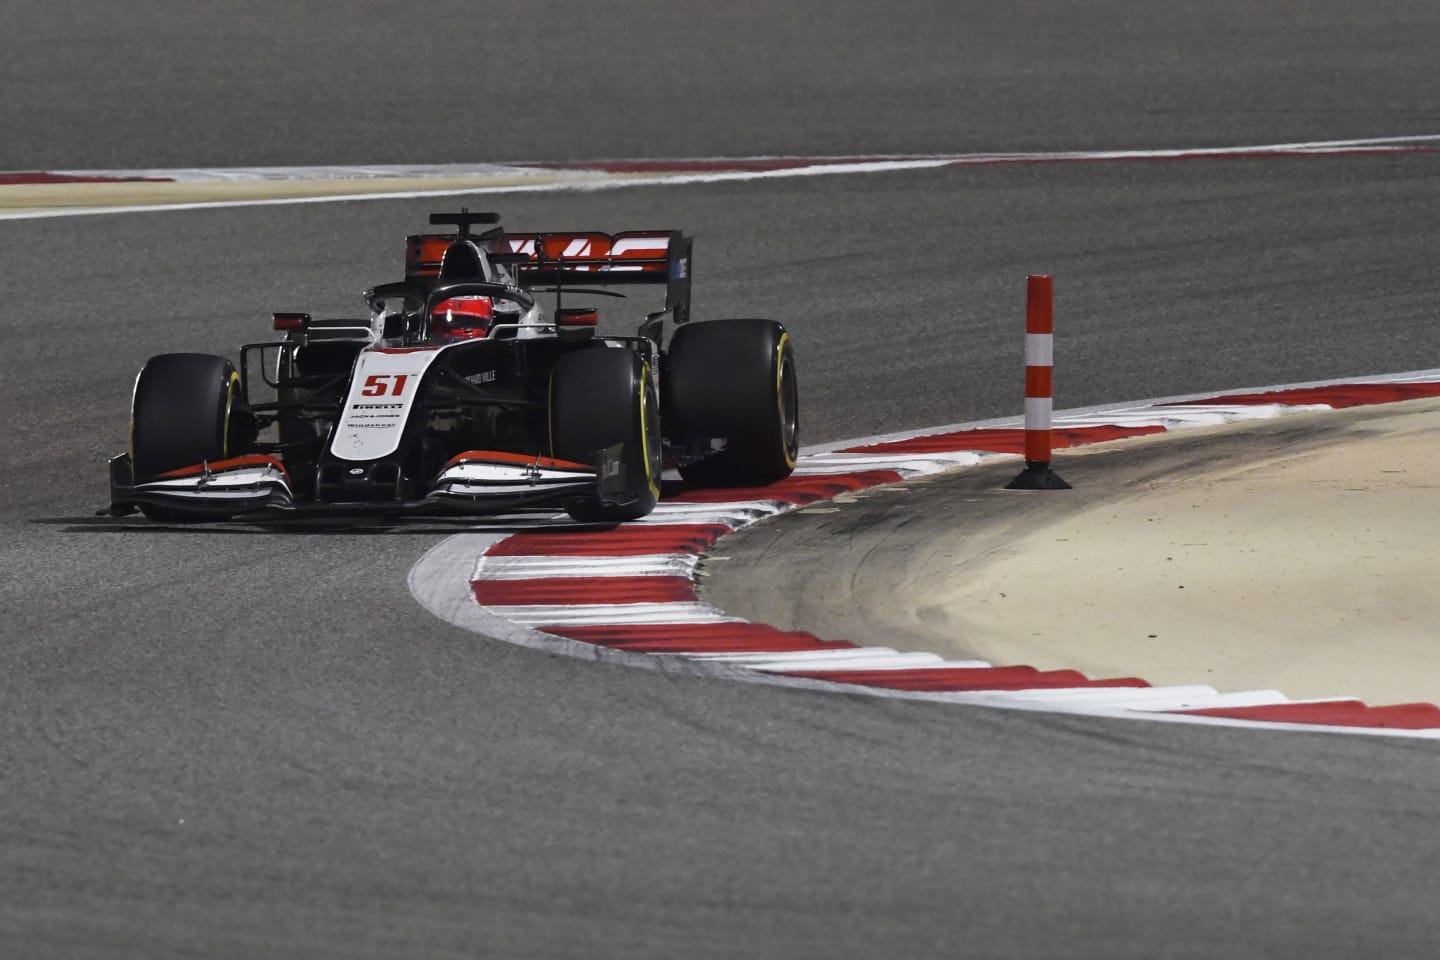 BAHRAIN, BAHRAIN - DECEMBER 06: Pietro Fittipaldi of Brazil driving the (51) Haas F1 Team VF-20 Ferrari on track during the F1 Grand Prix of Sakhir at Bahrain International Circuit on December 06, 2020 in Bahrain, Bahrain. (Photo by Rudy Carezzevoli/Getty Images)